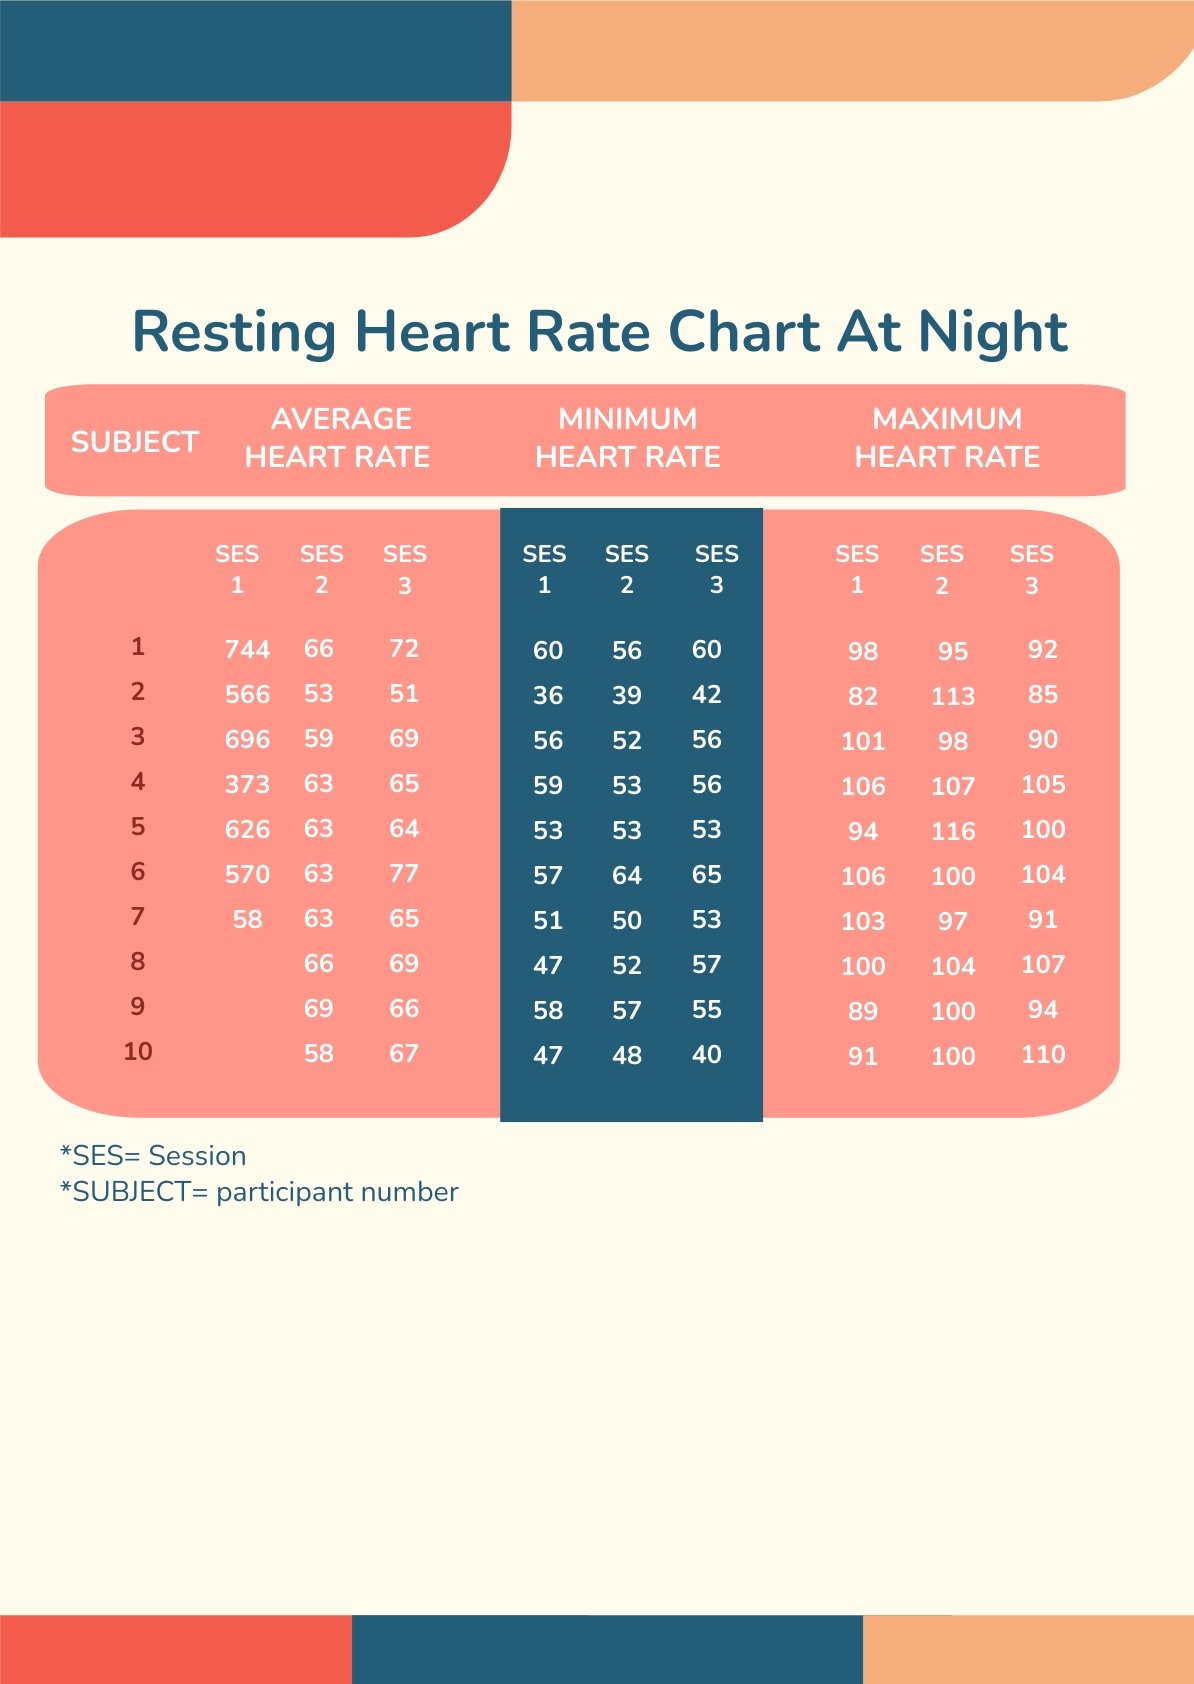 Resting Heart Rate Chart At Night